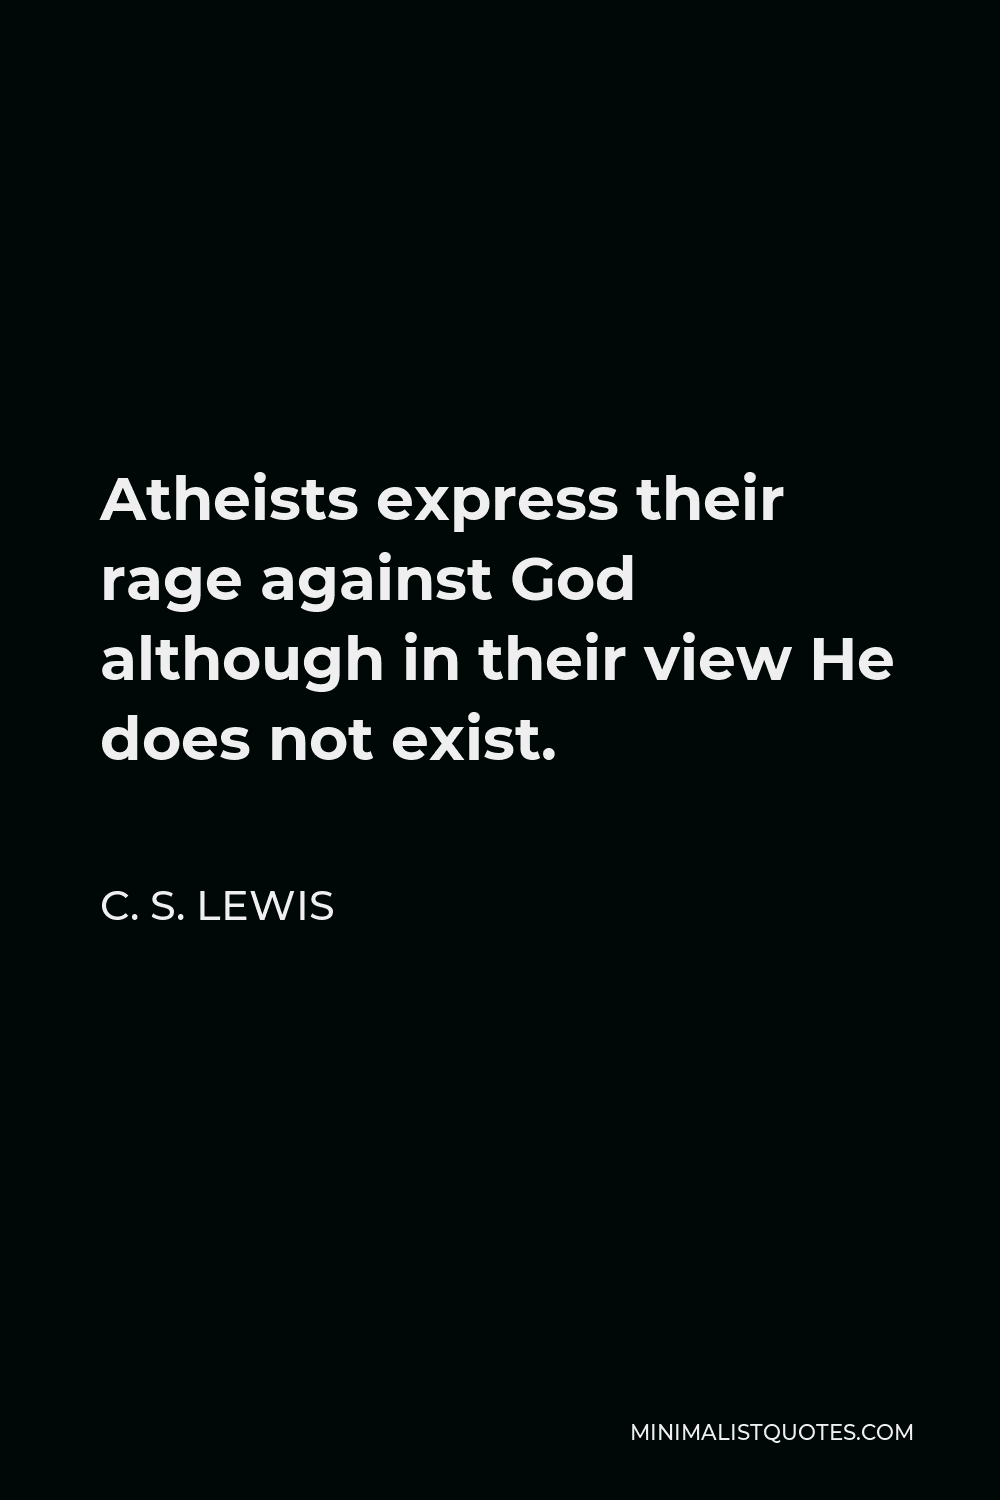 C. S. Lewis Quote - Atheists express their rage against God although in their view He does not exist.